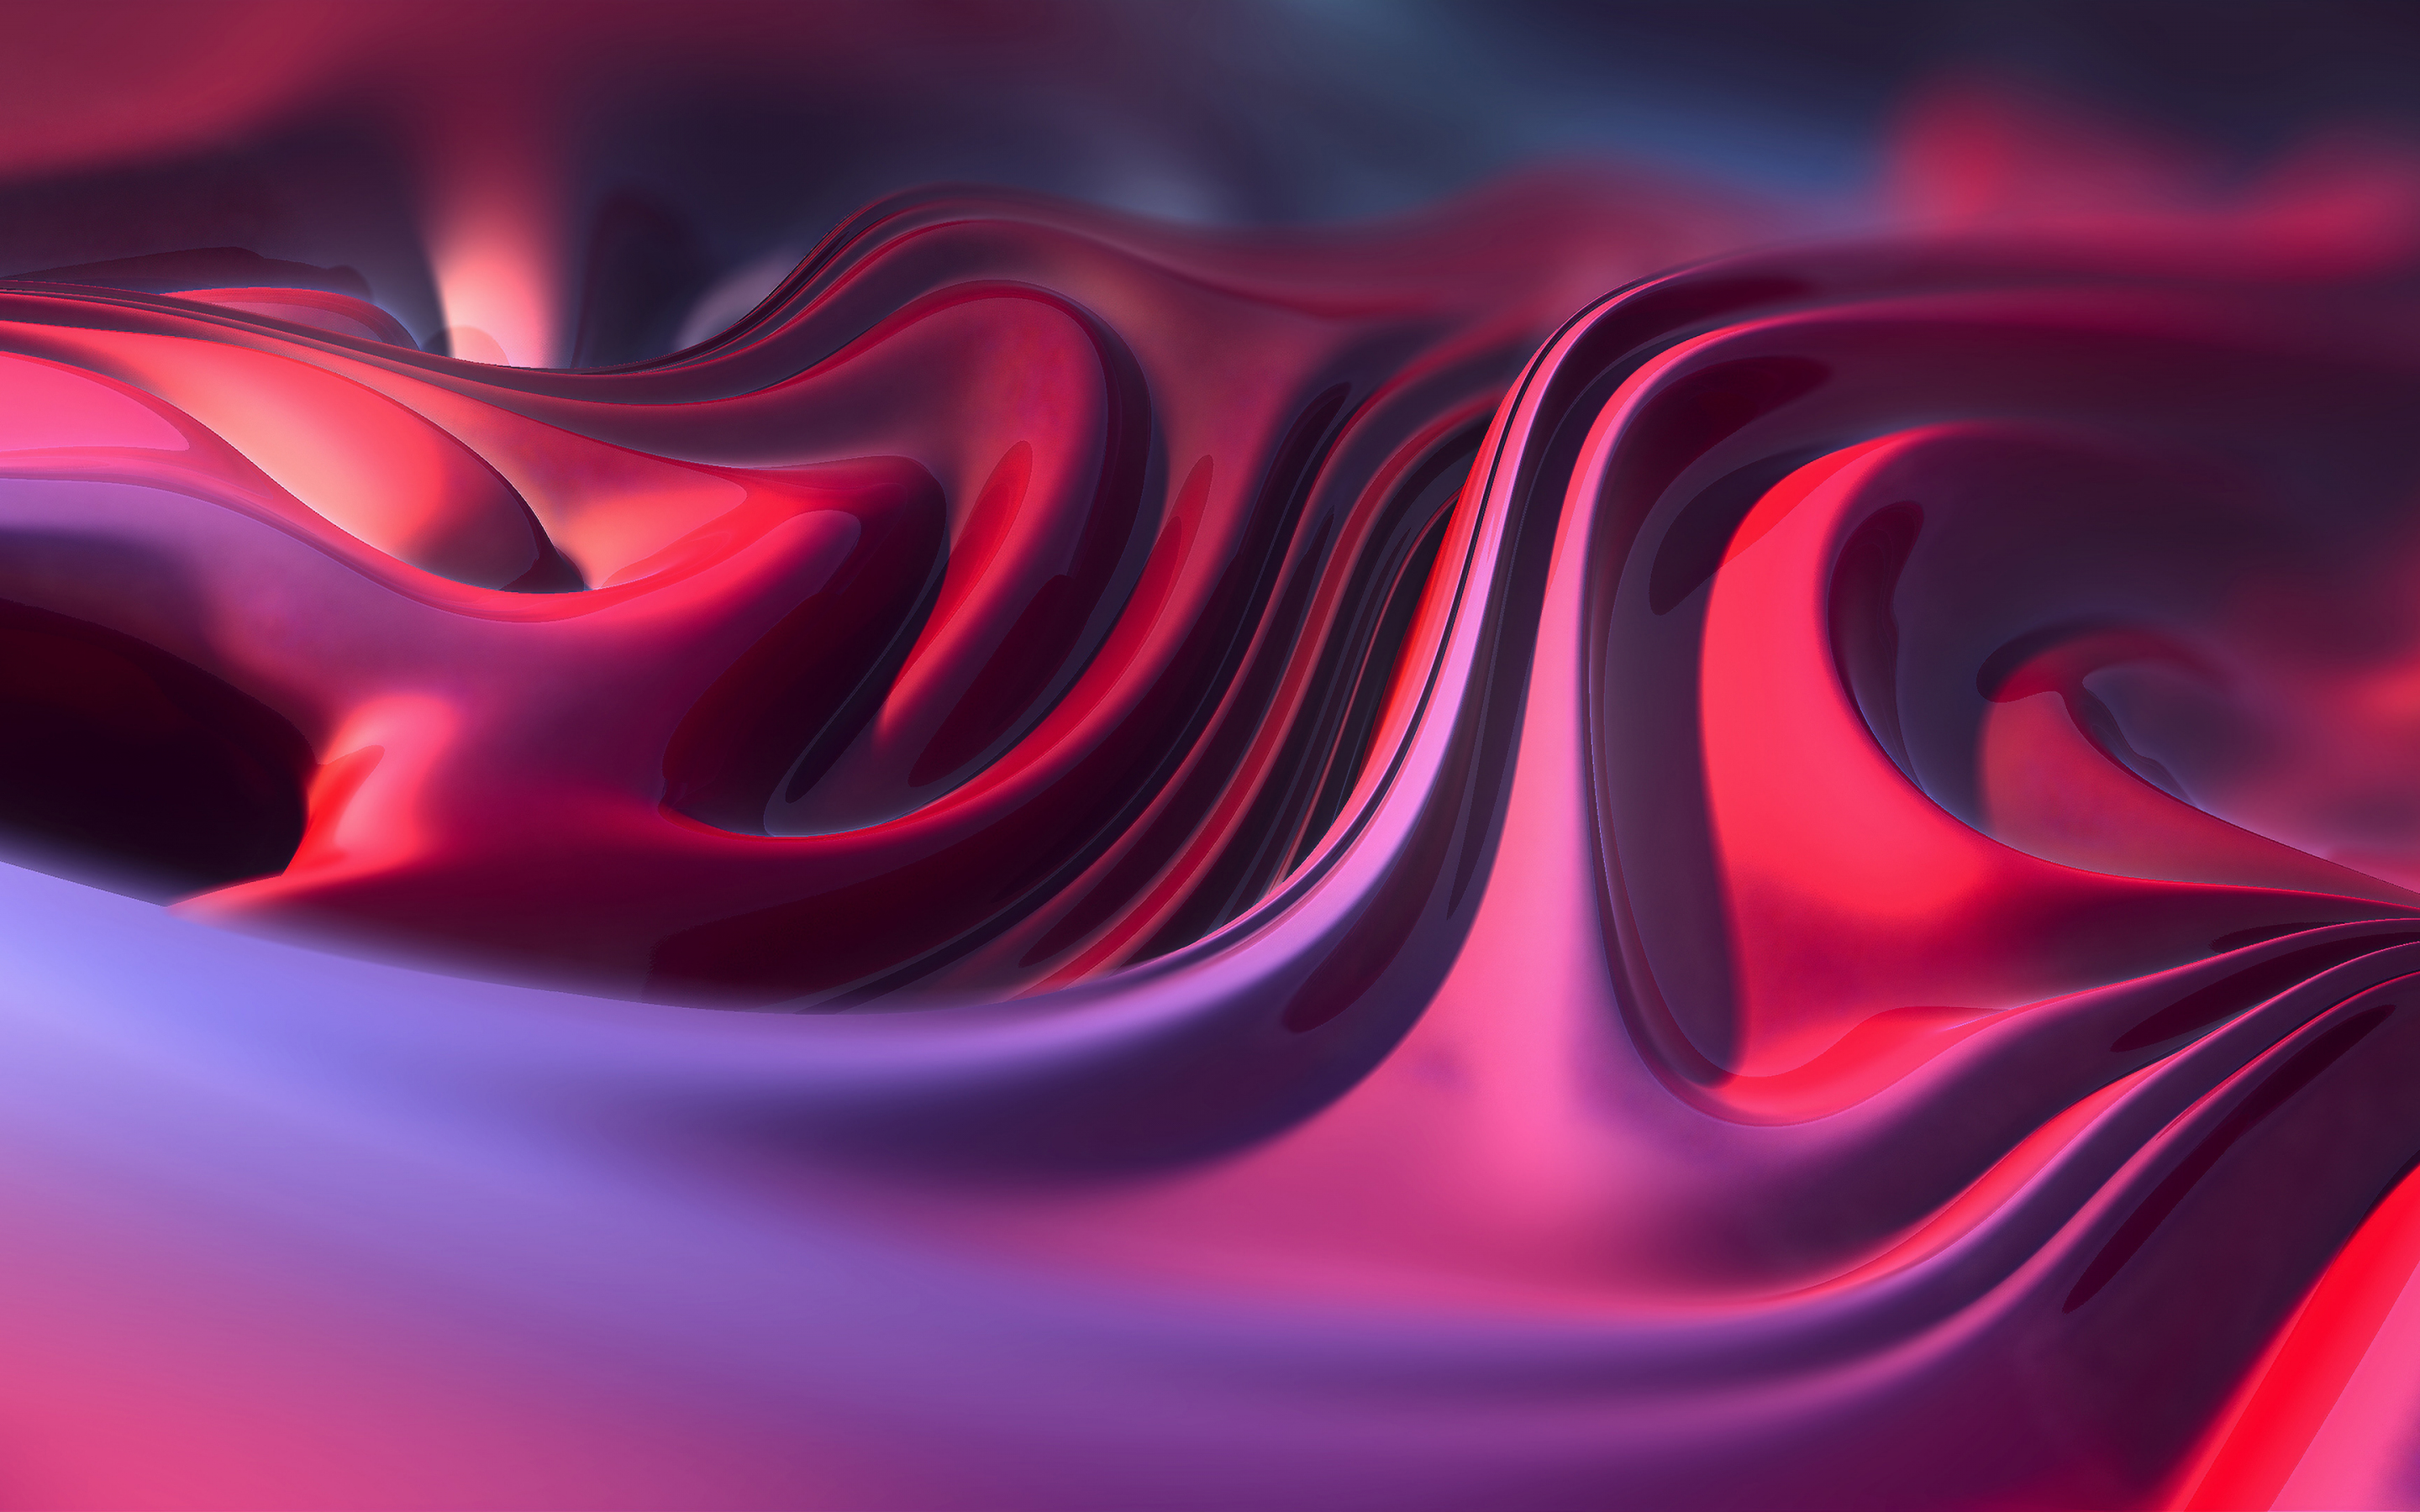 Free flow, ripple, pink, abstract, 2880x1800 wallpaper